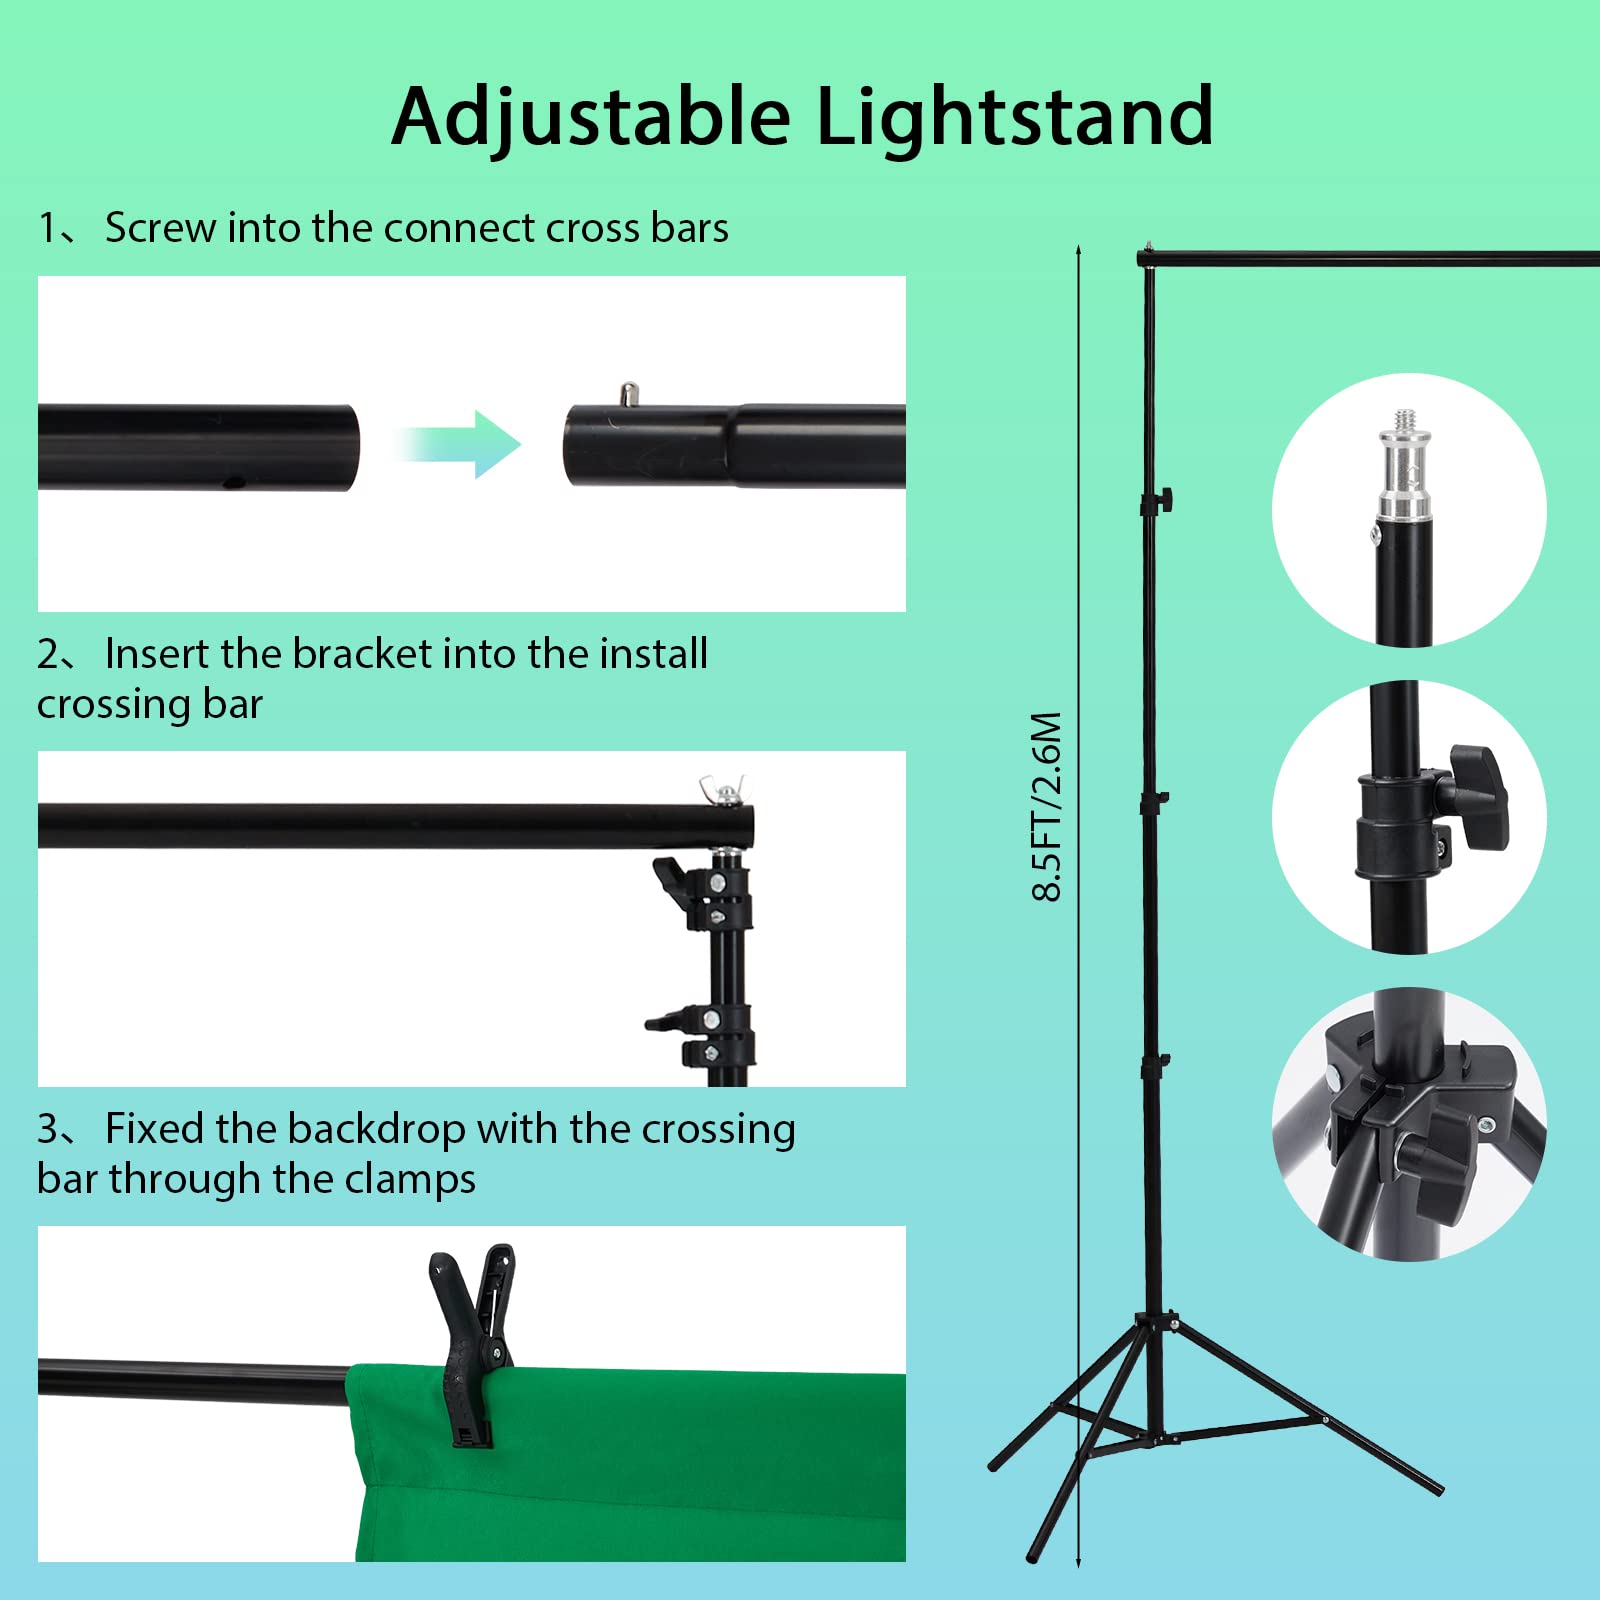 PioneerWorks Photography Lighting kit with Backdrops, 8.5ftx10ft Backdrop Stand, 5 tripod stands and Bulb, Umbrella Softbox Continuous Lighting, Photo Studio Equipment for Portrait Product Photo Shoot